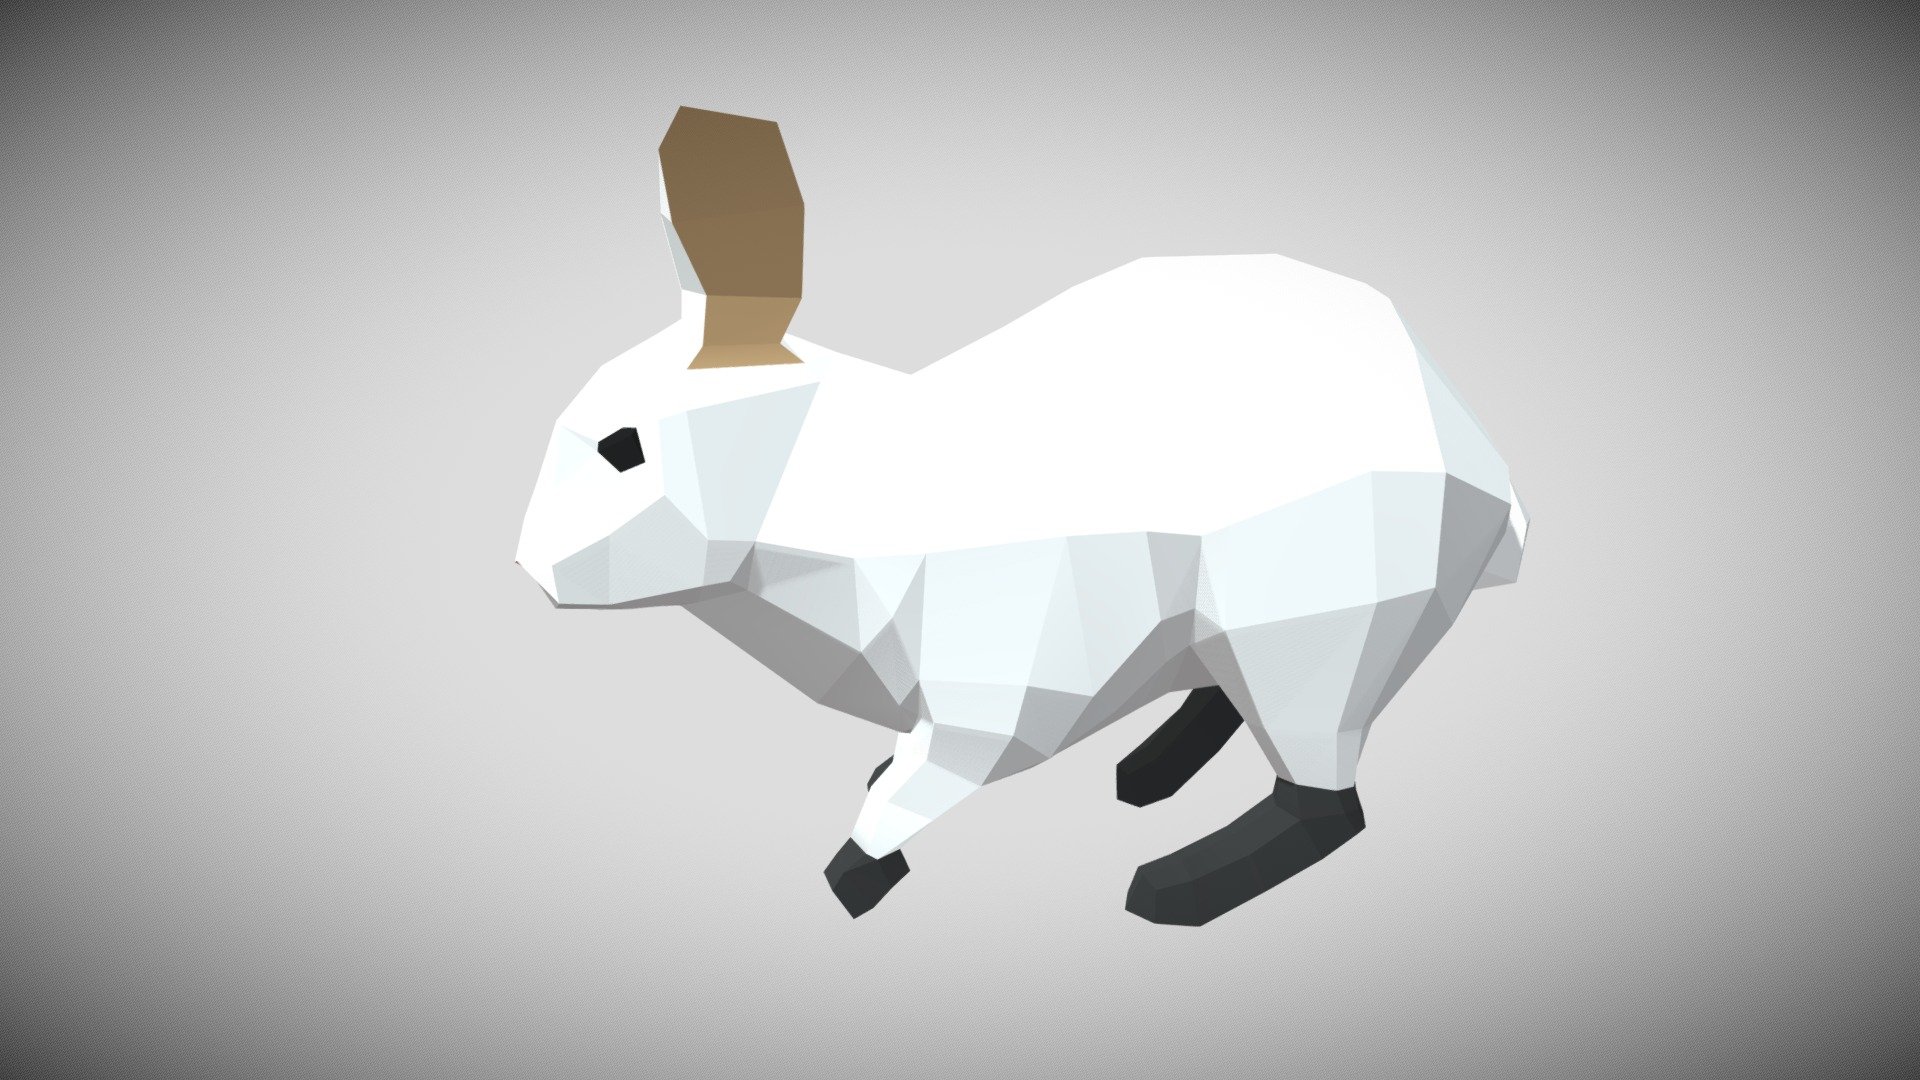 3D low-poly rabbit, rigged and has textures
Has 5 animations - Low-poly animated rabbit - 3D model by Pneshik 3d model